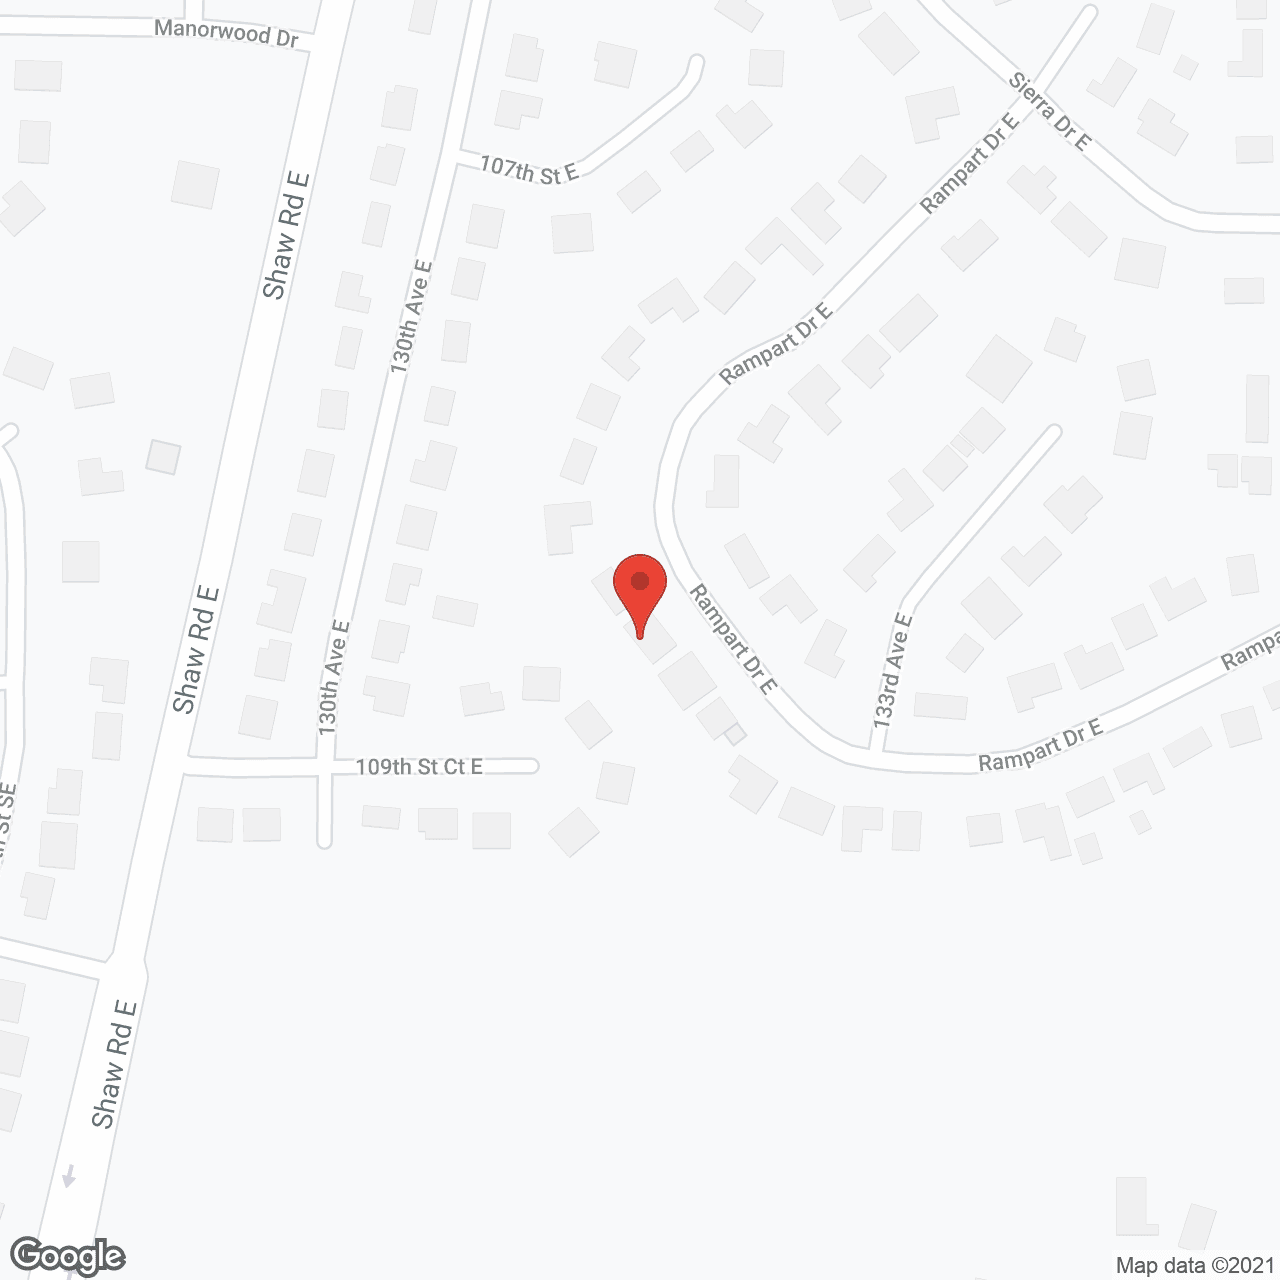 Vista Adult Family Home in google map